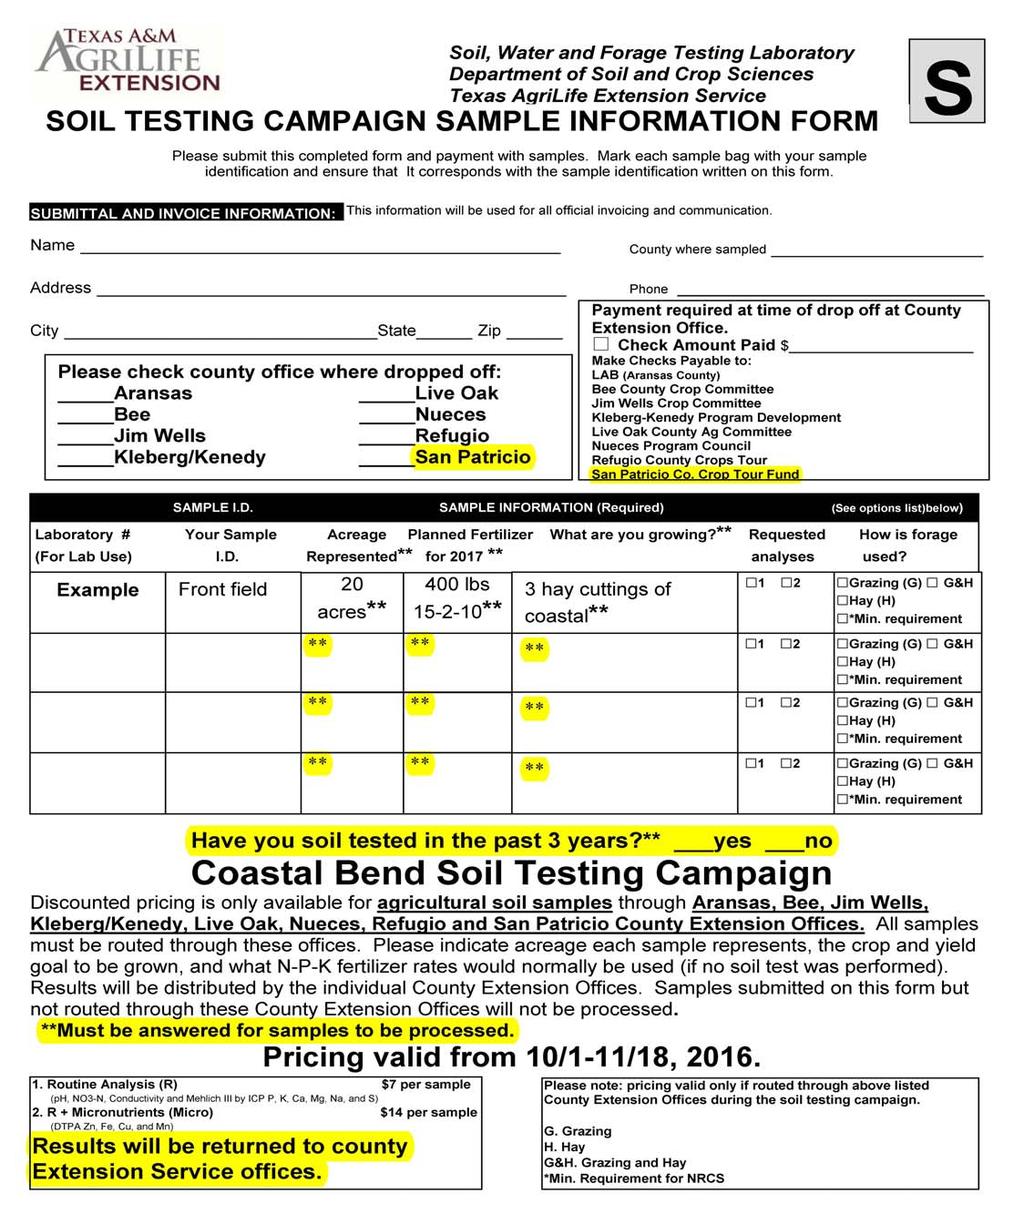 Soil sample bags and forms are available at